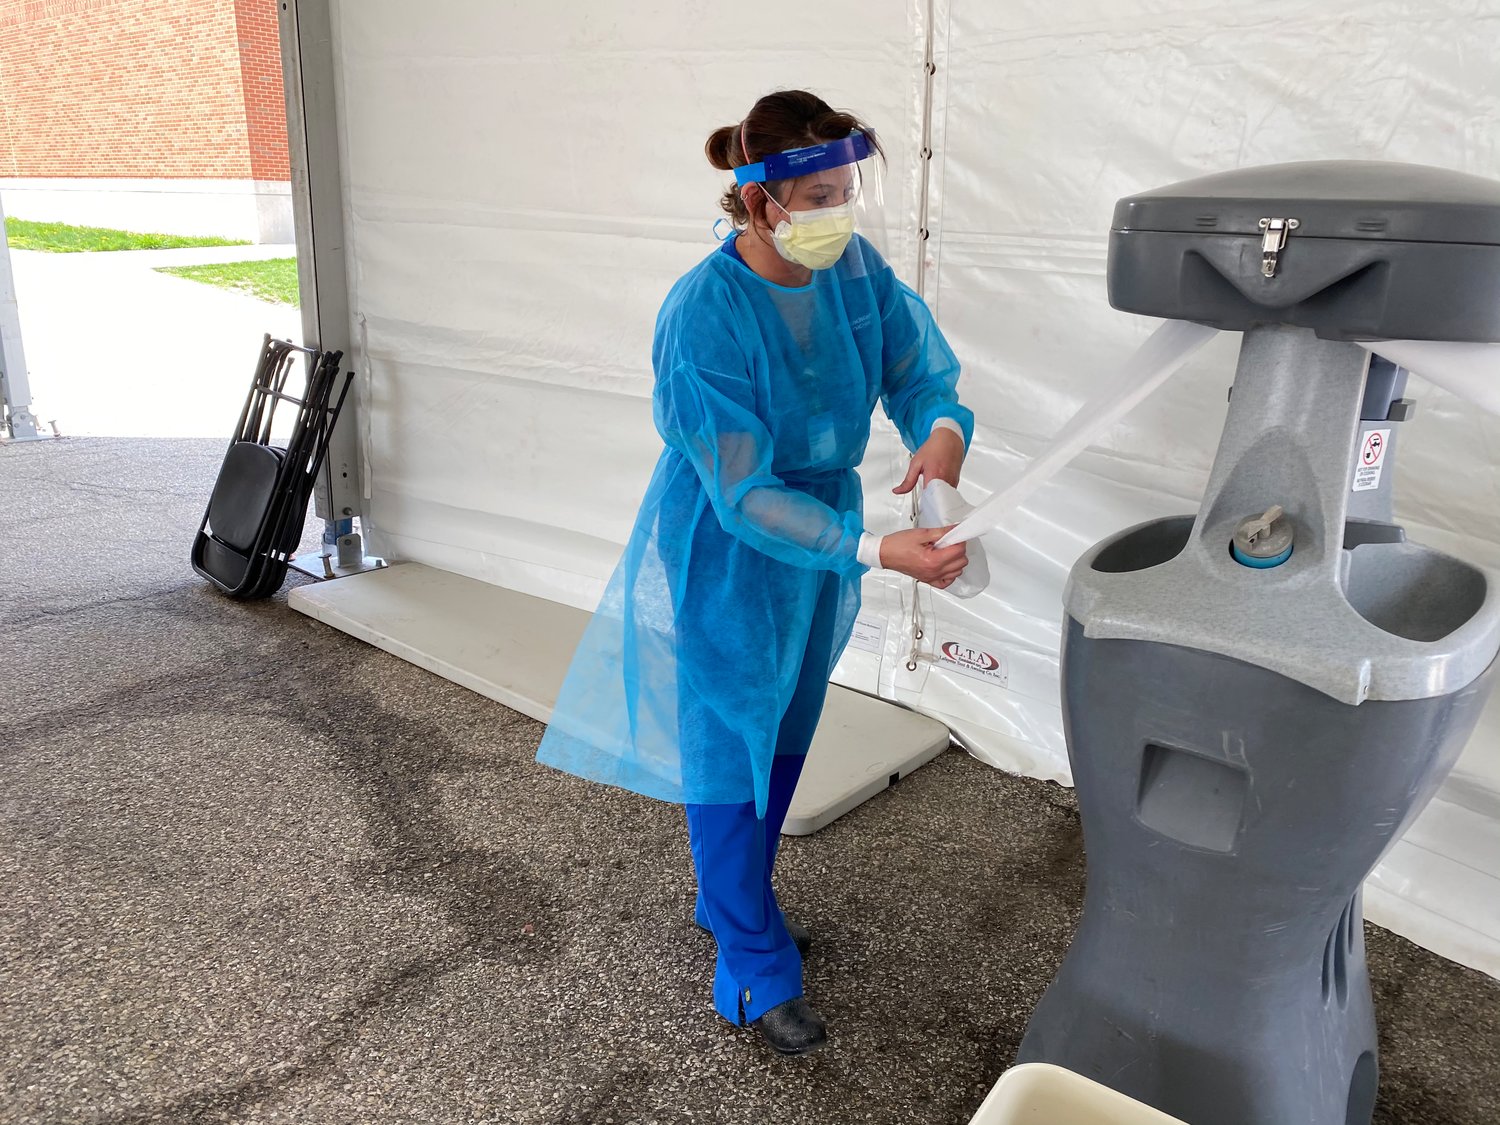 Megan Ellingwood, a certified medical assistant at Franciscan Health, disinfects after conducting a COVID-19 test at the drive-thru testing site at Crawfordsville High School.